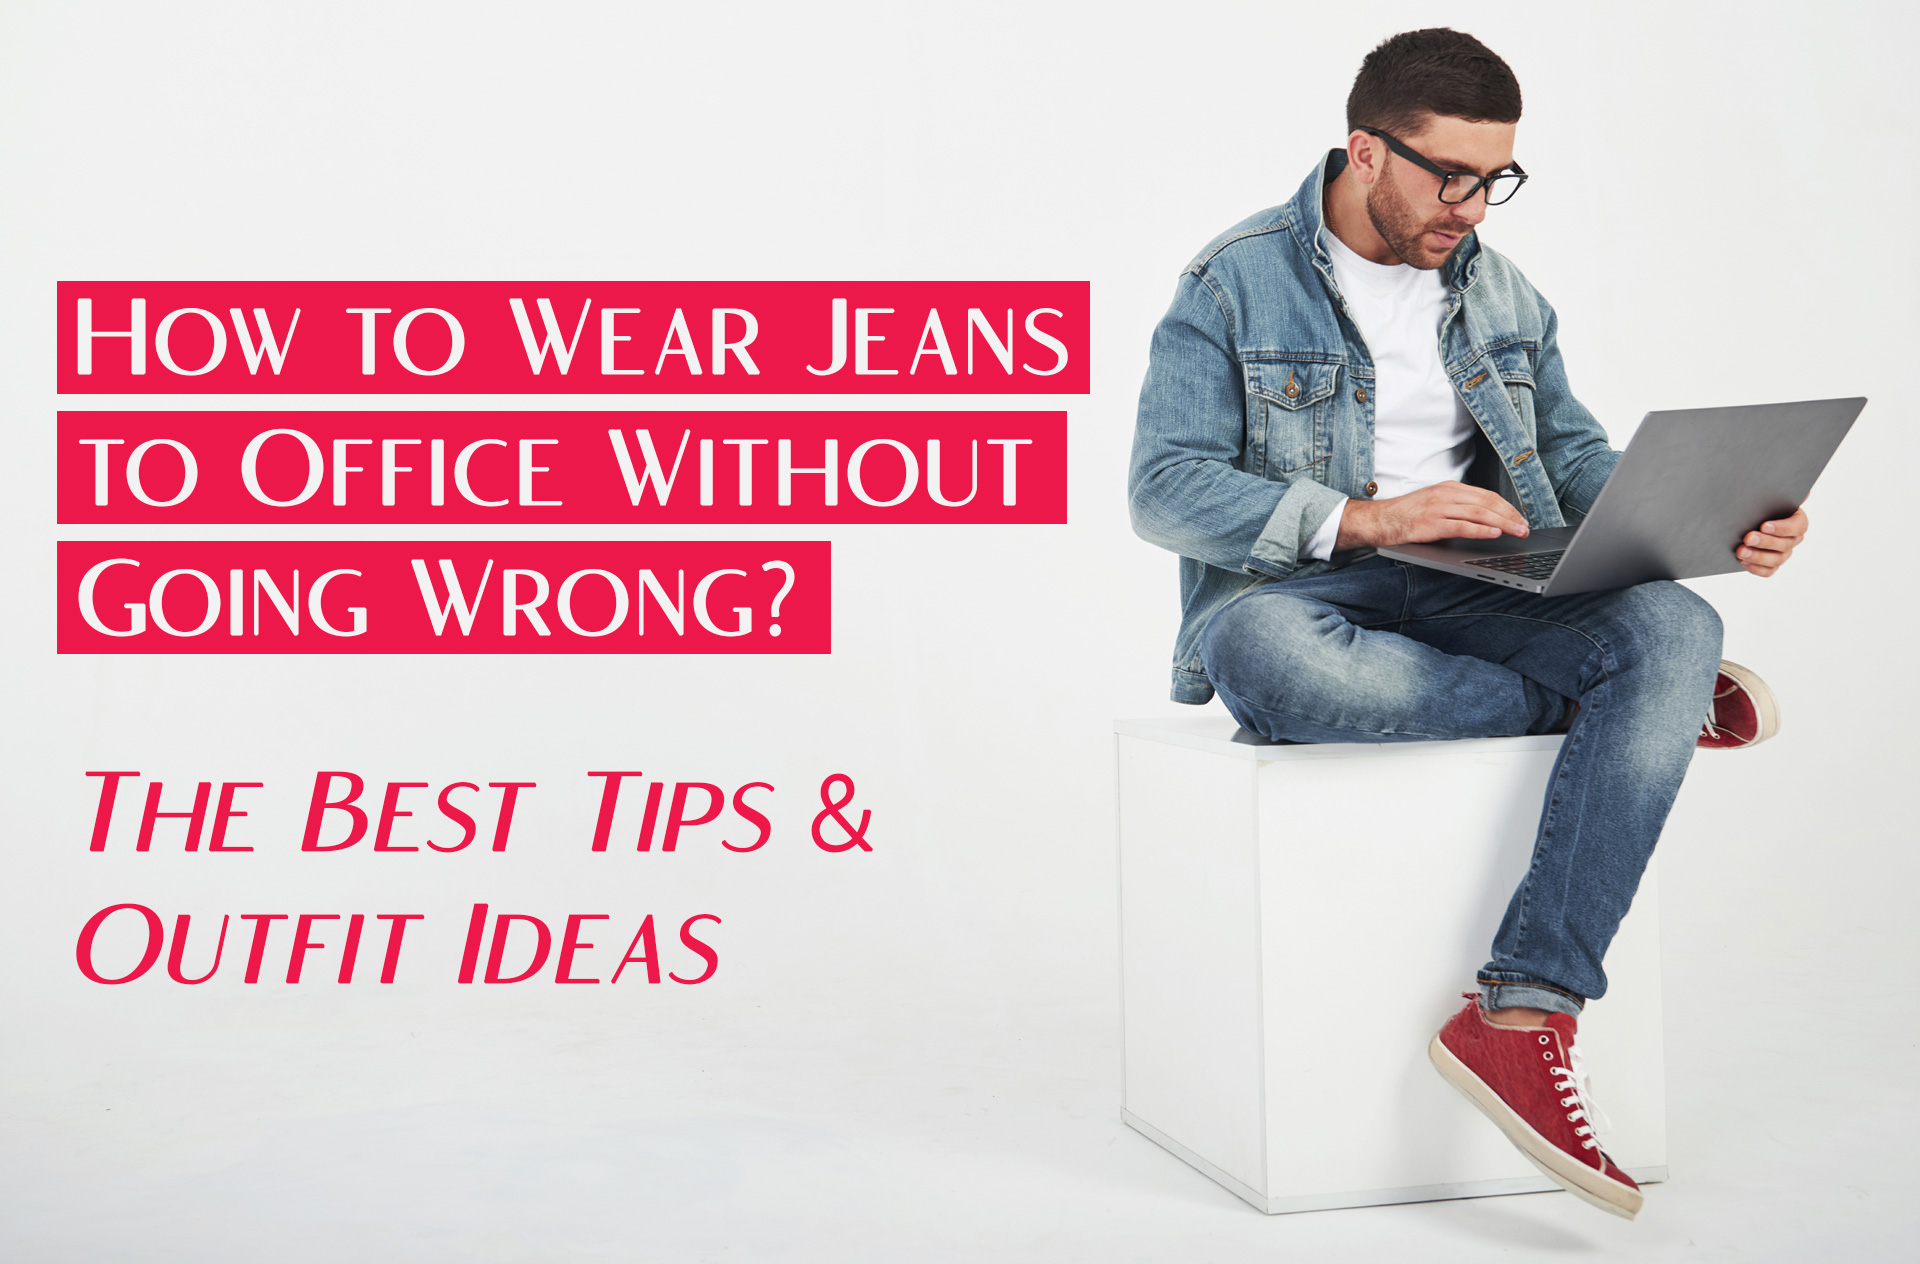 Jeans for Office